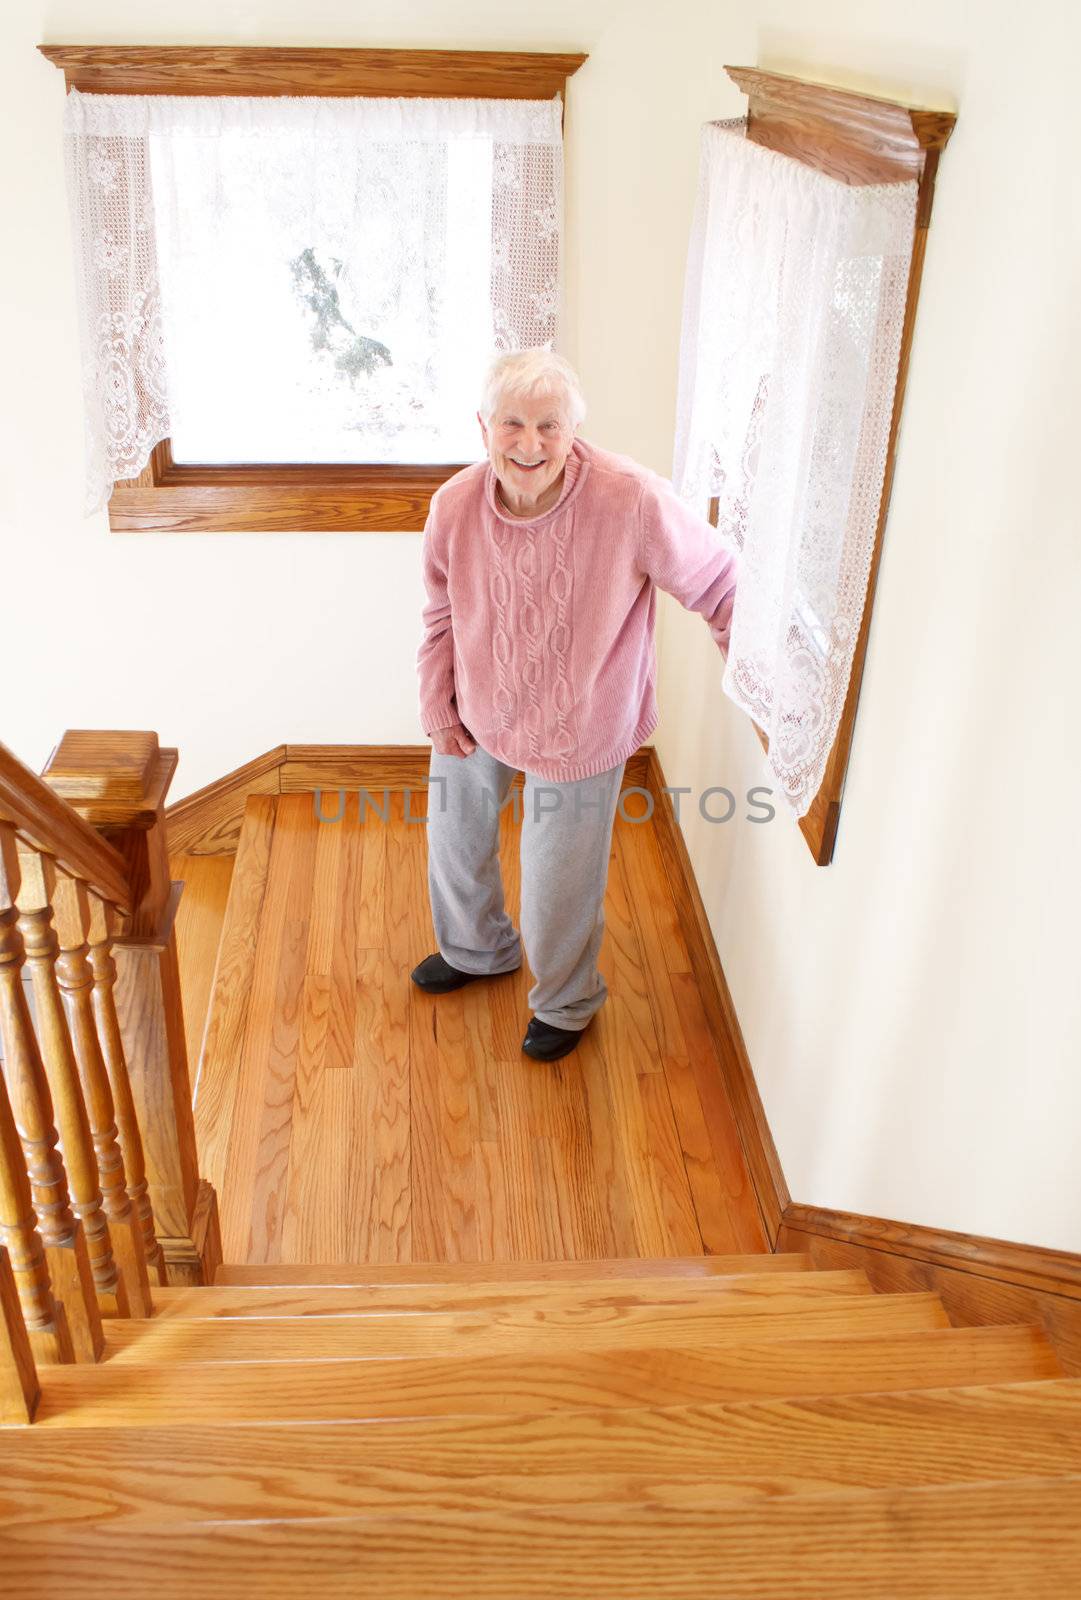 Senior woman in front of staircase in day time